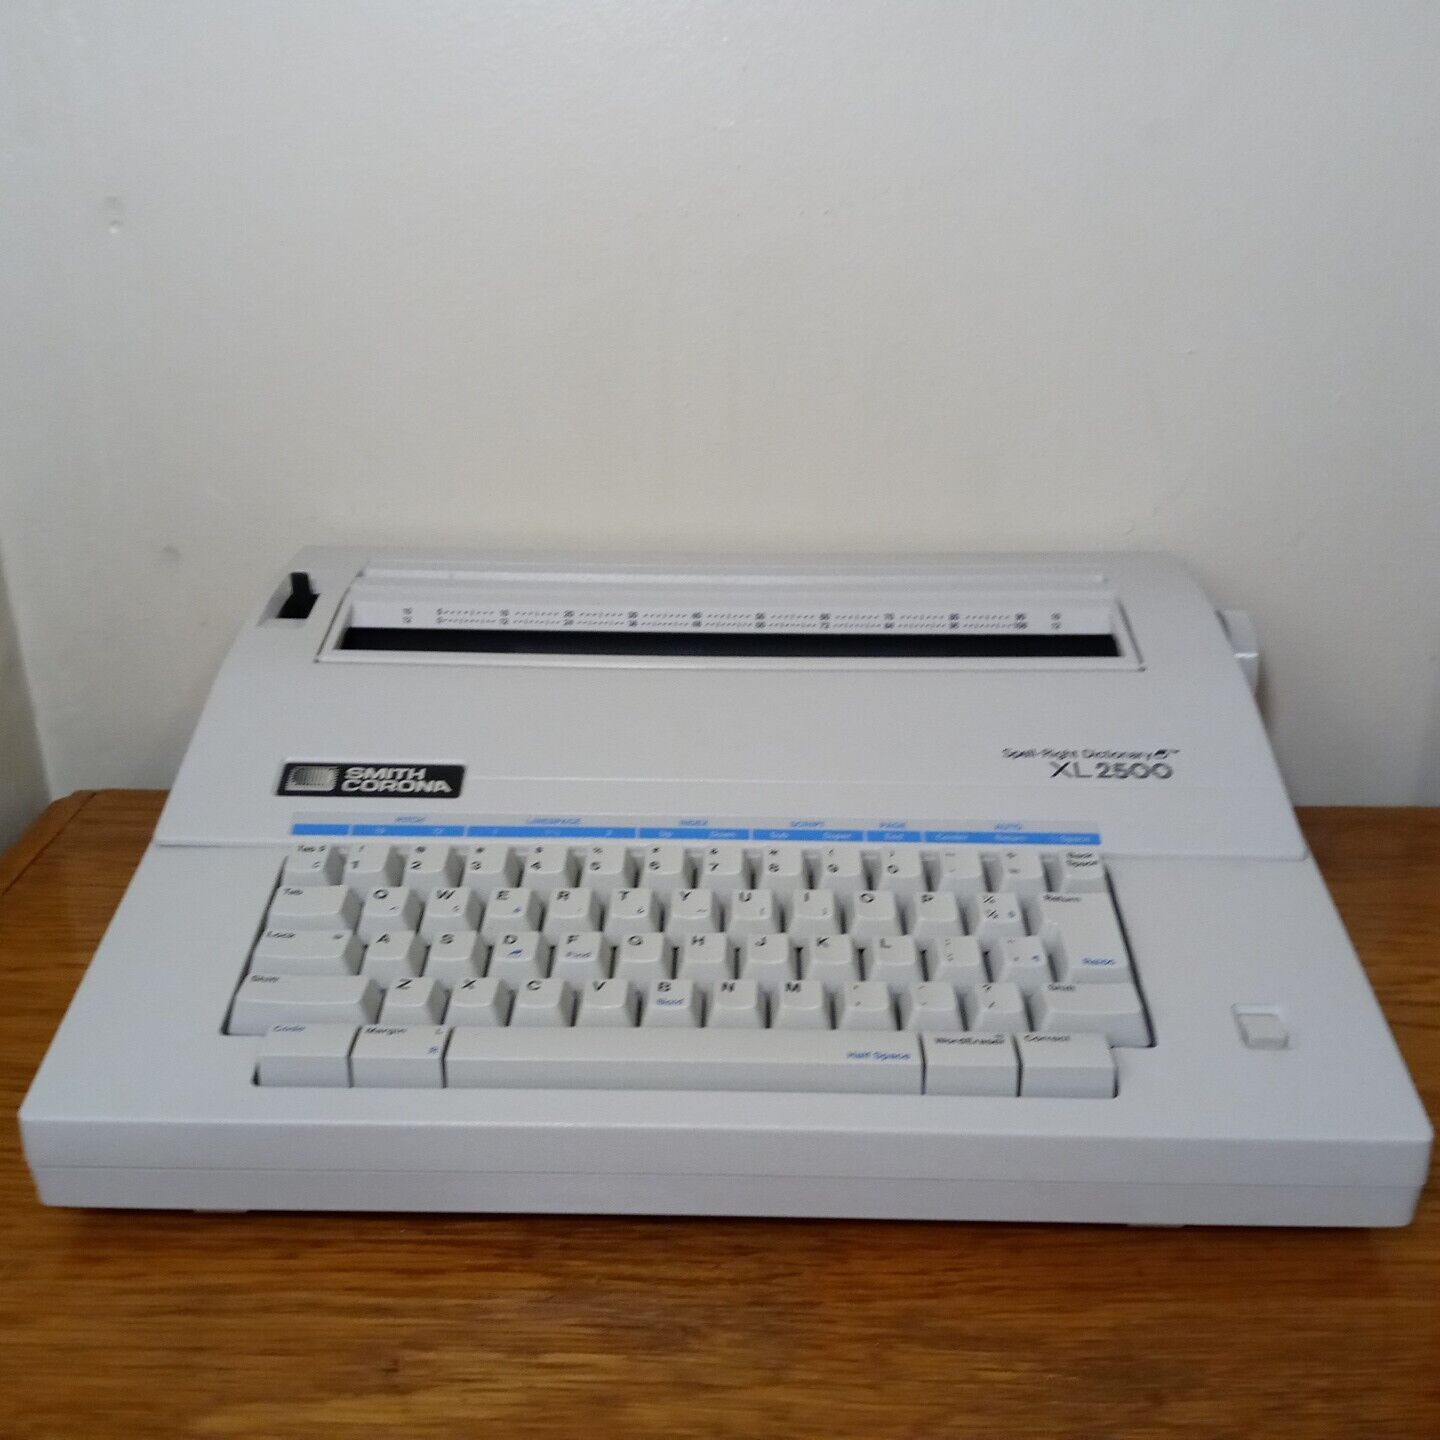 Smith Corona Spell-Right Dictionary XL2500 Electric Typewriter With Cover